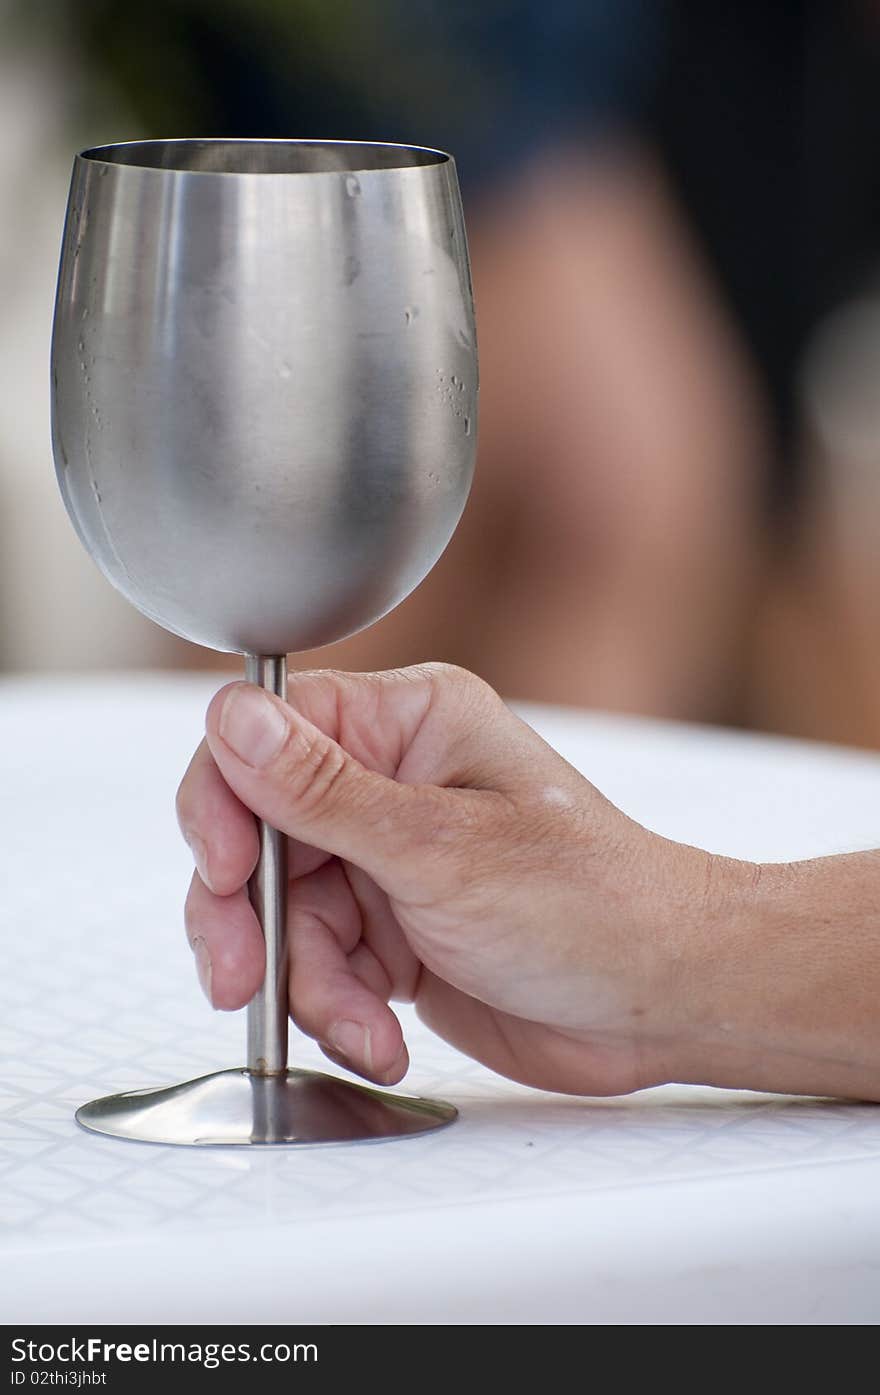 Woman hand holding a stainless steel wine glass. Woman hand holding a stainless steel wine glass